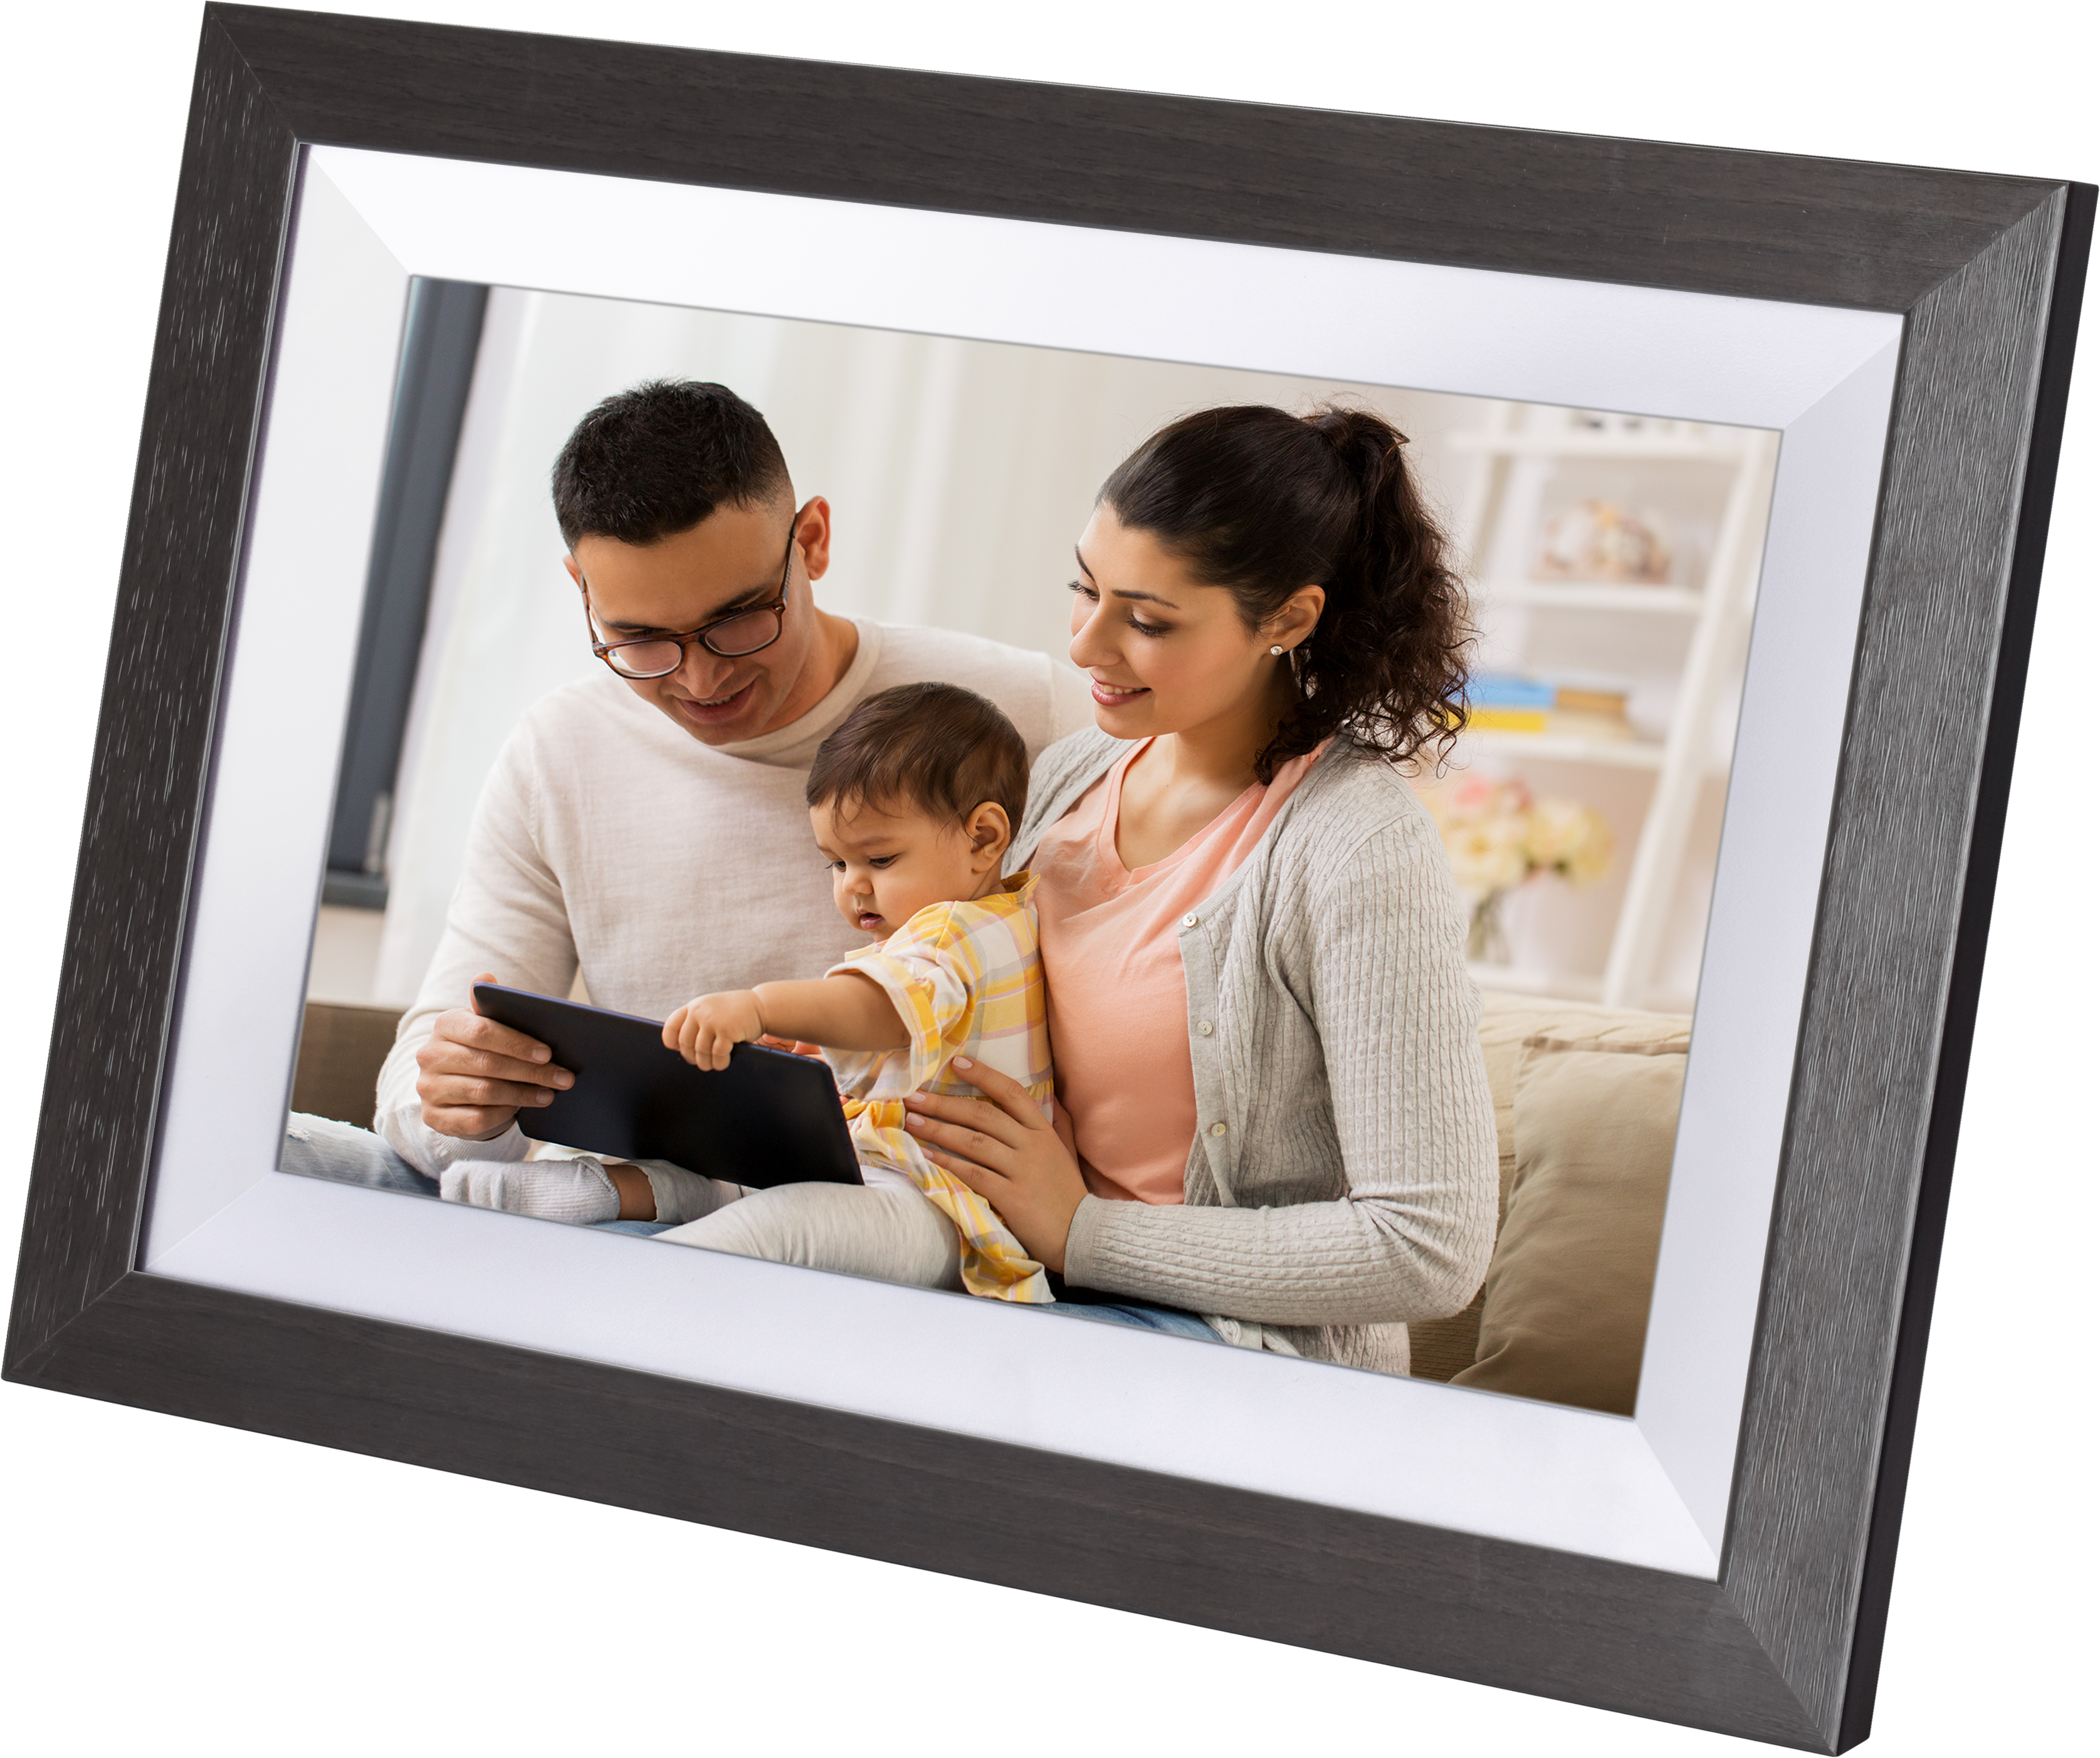 Kodak Classic Wooden Digital Photo Frame 1012W, 10.1 inch Touchscreen, WiFi Enabled, 16GB Internal Memory extendable with Memory Card (Black)